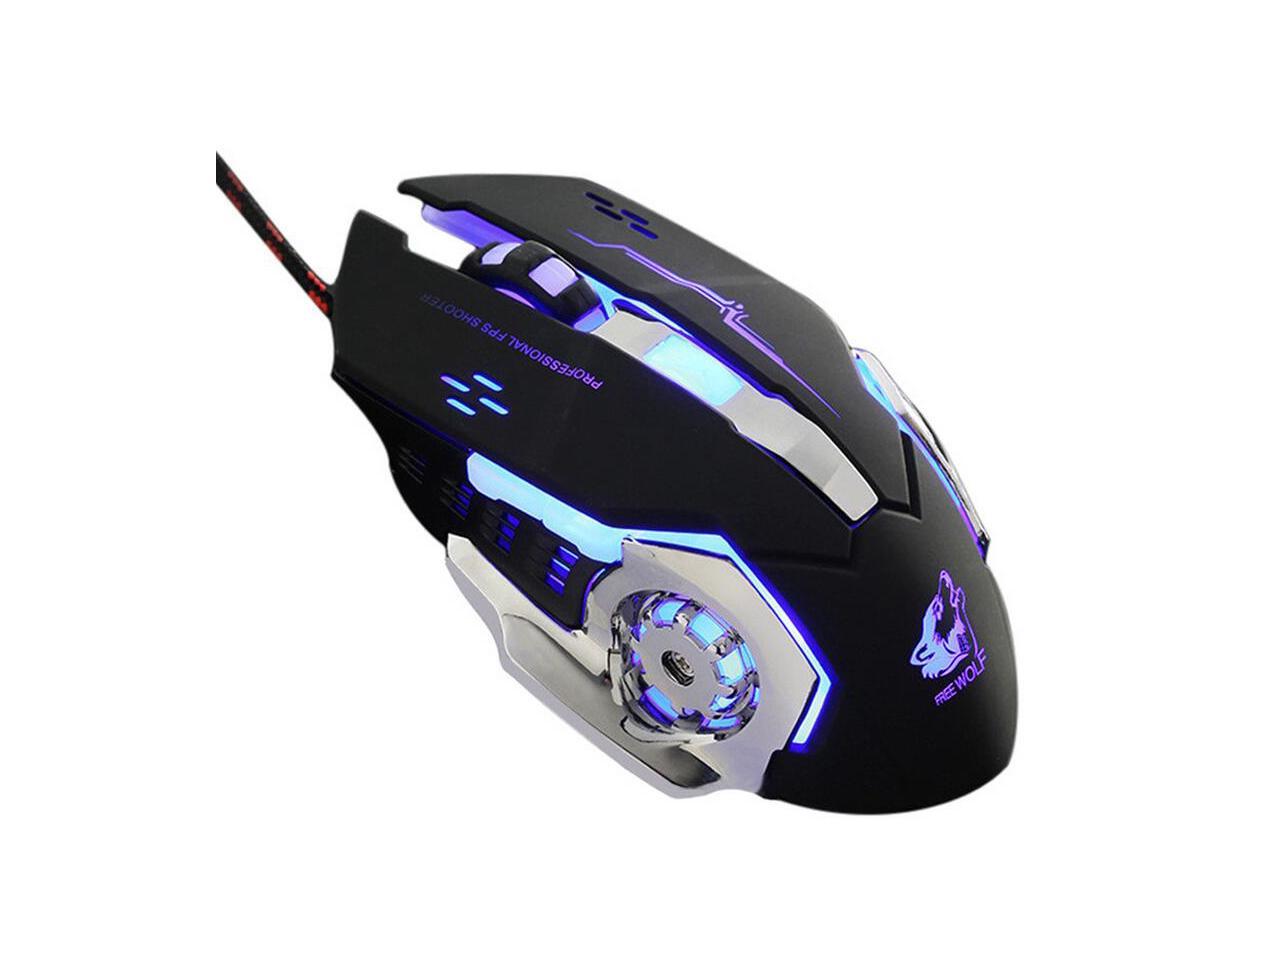 Estone Gaming Mause Computer Peripherals 6 Button Wired Mouse 4 Color Breathing Lamp Ajustable 4000dpi Usb Mice Mechanical Mouse Gamer Newegg Com